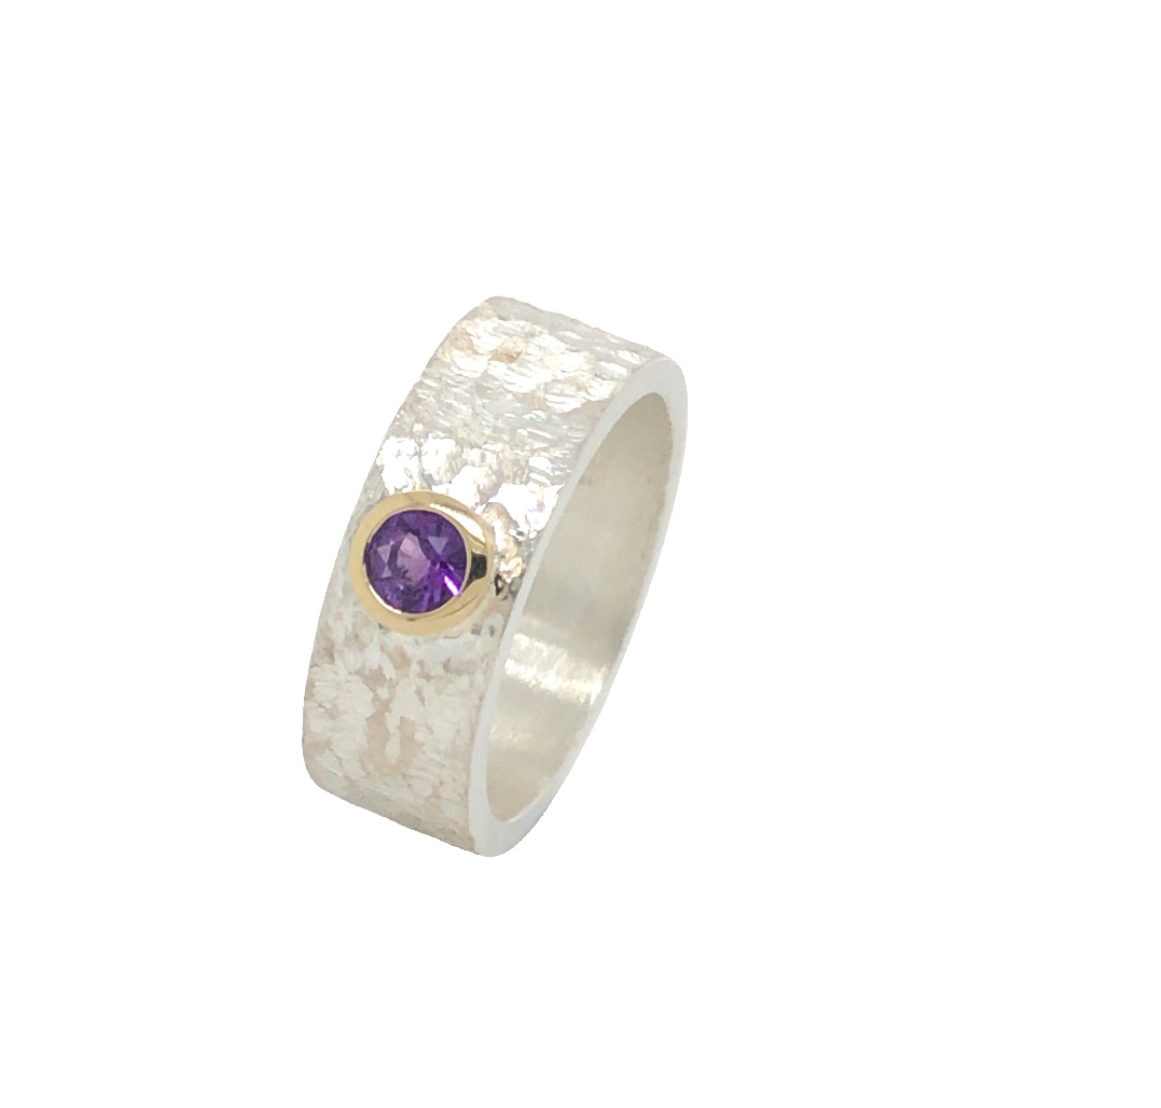 Amethyst Ring with 9ct Gold Rub Over Setting and Wide Sterling Silver Band_0